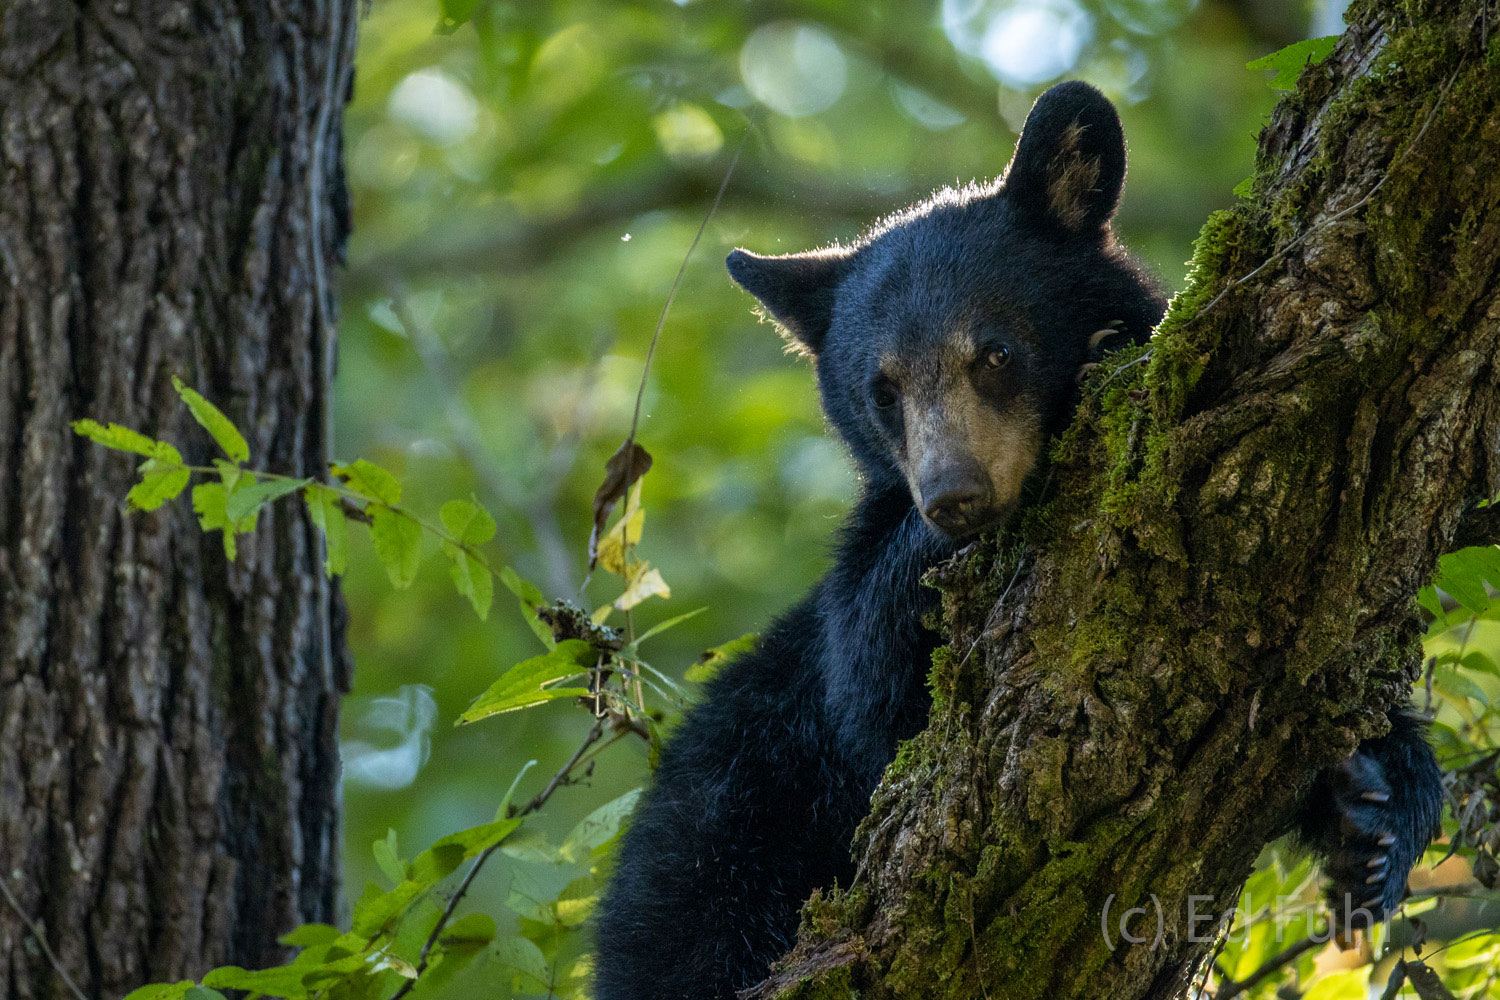 Draped over a tree branch, in perfect balance, a black bear prepares for an afternoon nap.